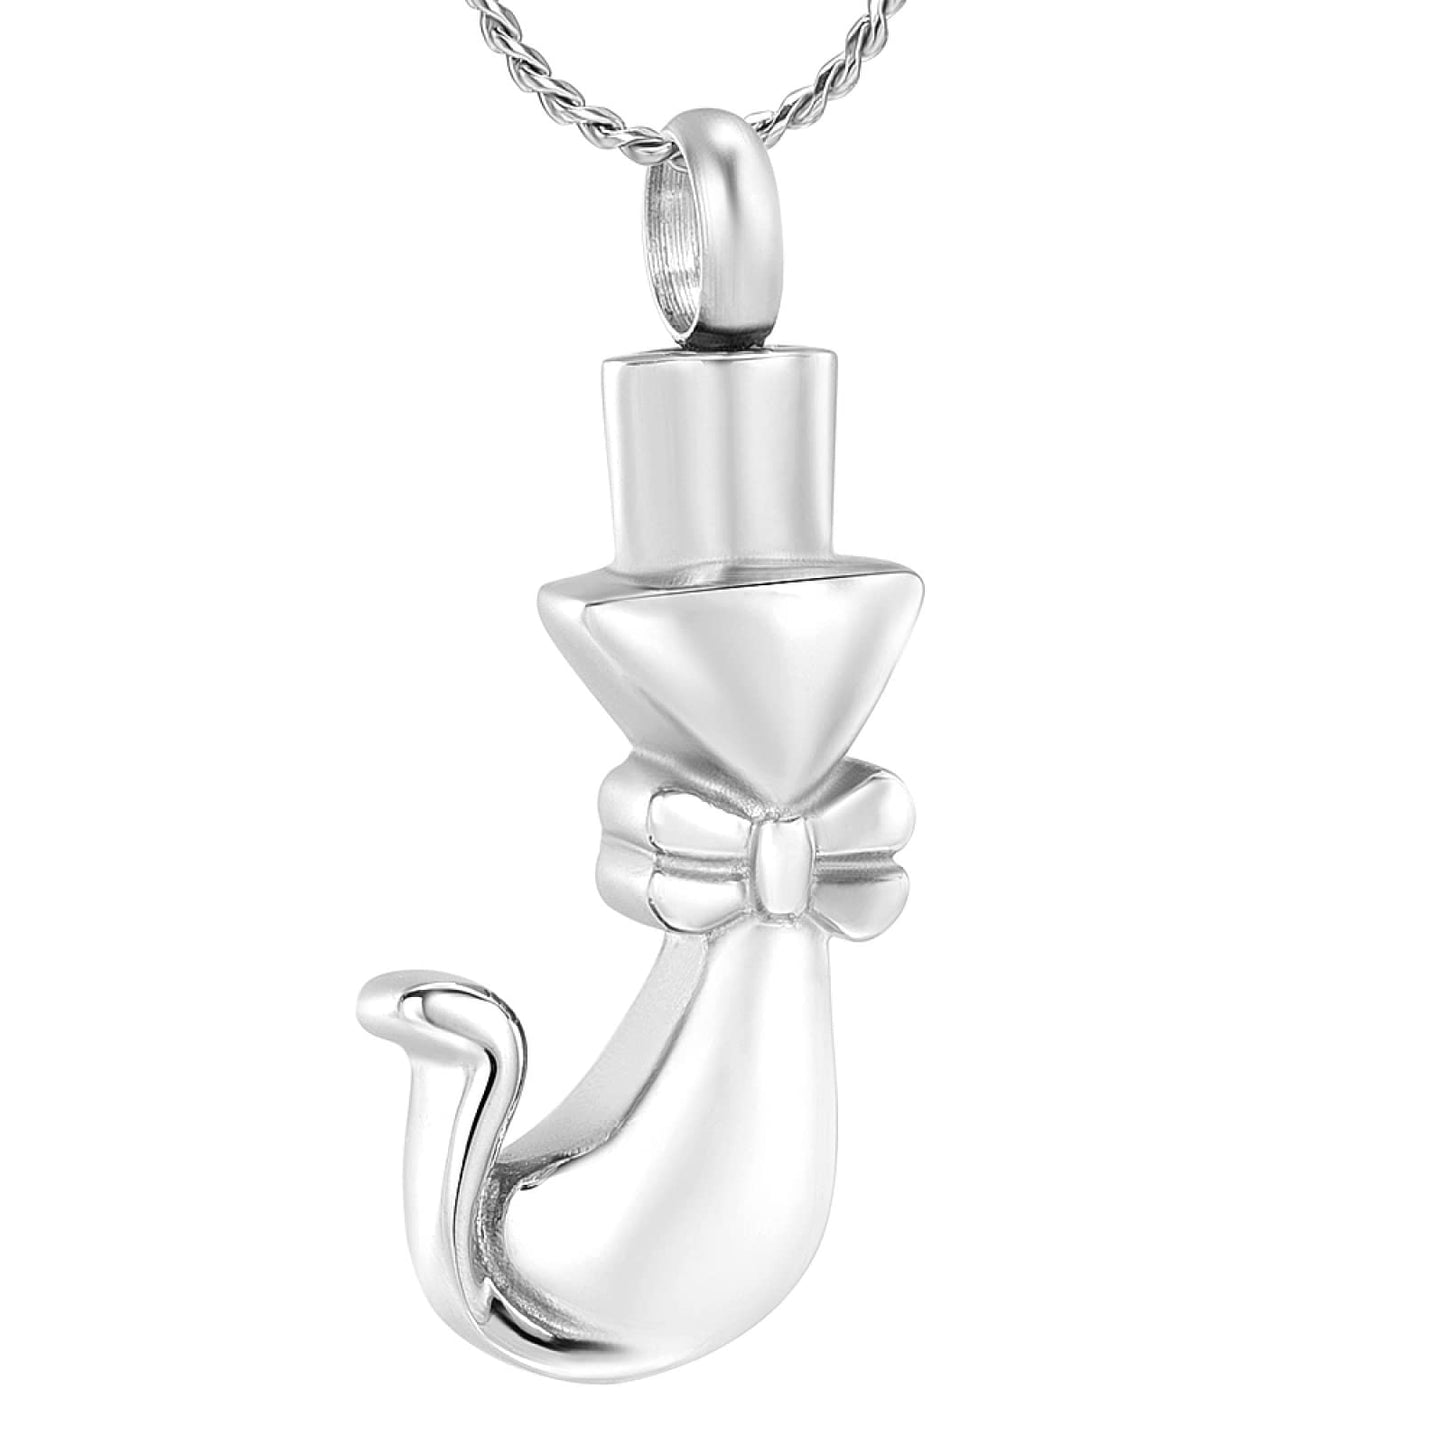 jjshily Pet Cremation Jewelry For Ashes Of Dog/Cat Funeral Keepsake Urn Necklace Pendant Memorial Jewellery